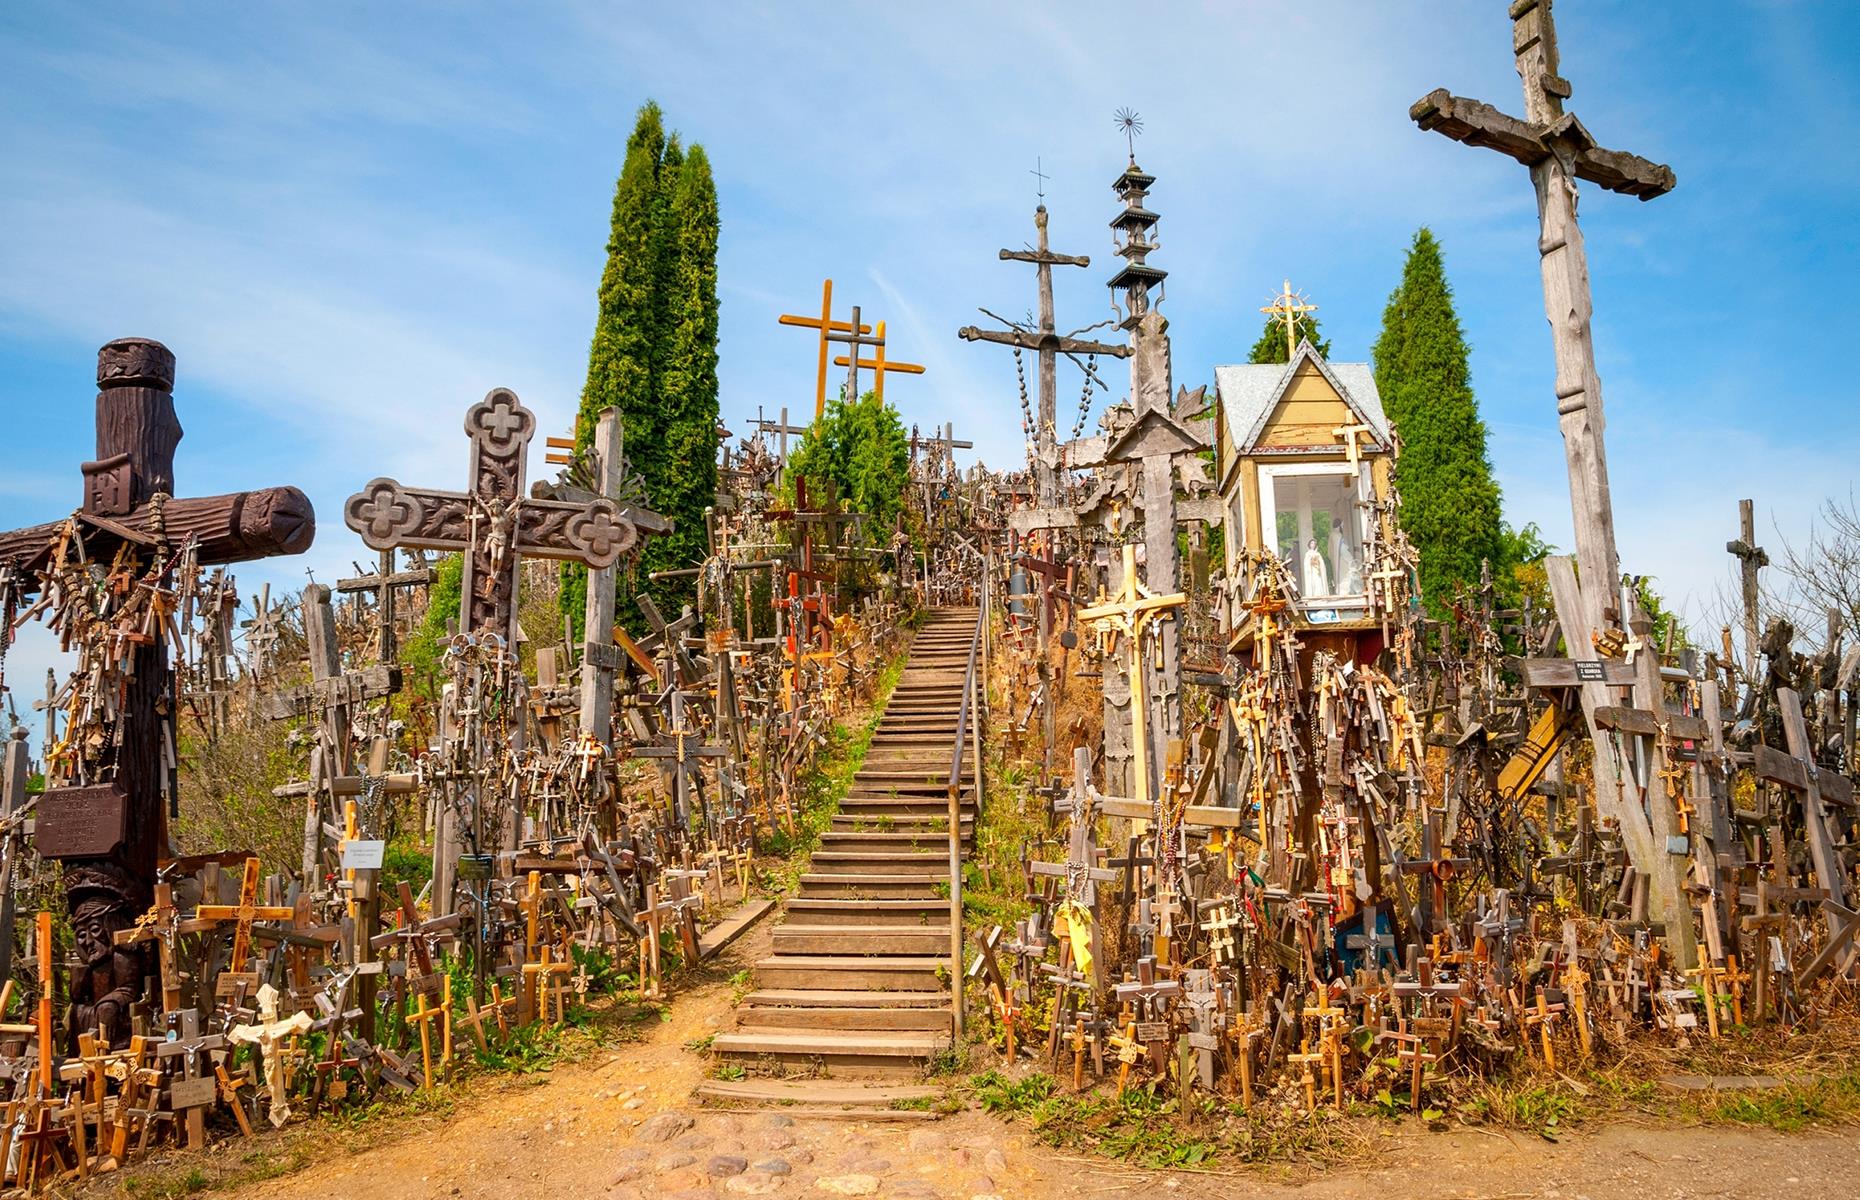 Lithuania's Hill of Crosses, just outside the city of Šiauliai, is considered a creepy sight, not least because its origins remain a mystery. Thousands of wooden crosses stud the hillside and, over the years, they've been damaged by fire and were even removed by authorities during the Soviet era. Still, though, locals have restored the site across the decades and, despite its eerie reputation, it doubles as a peaceful place of pilgrimage.